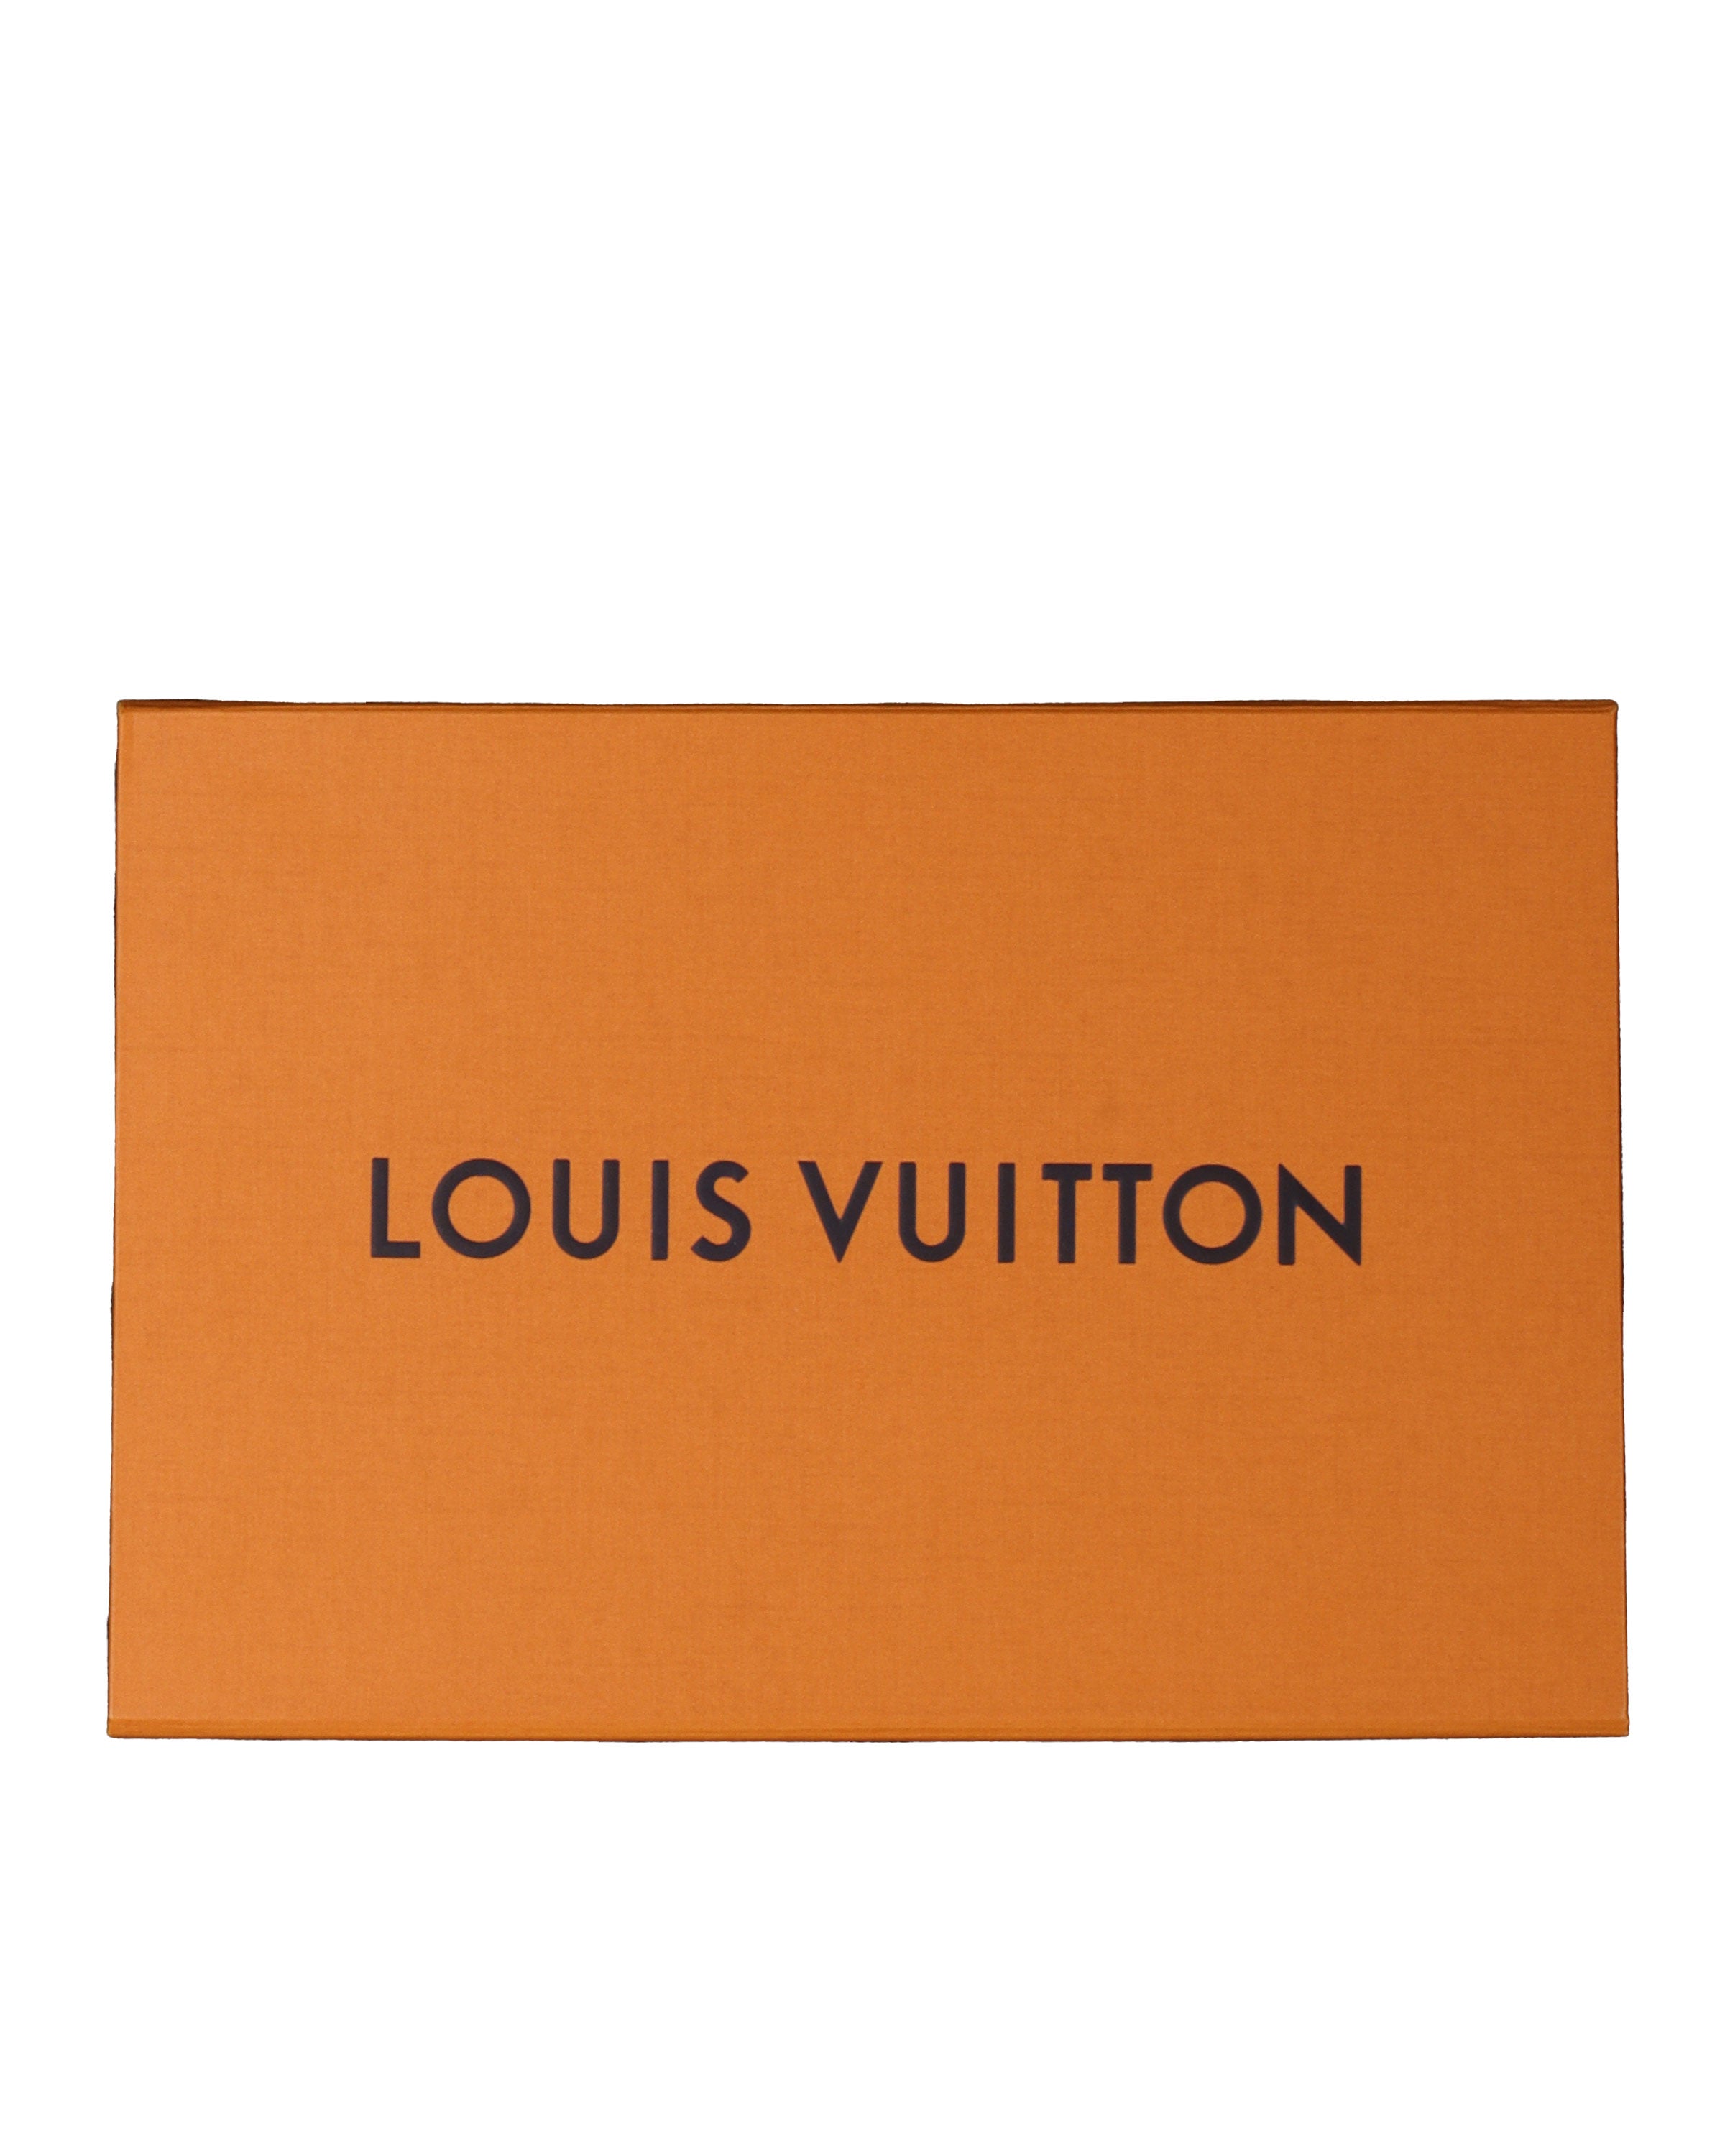 Louis Vuitton LV 3D Bandana Available For Immediate Sale At Sotheby's